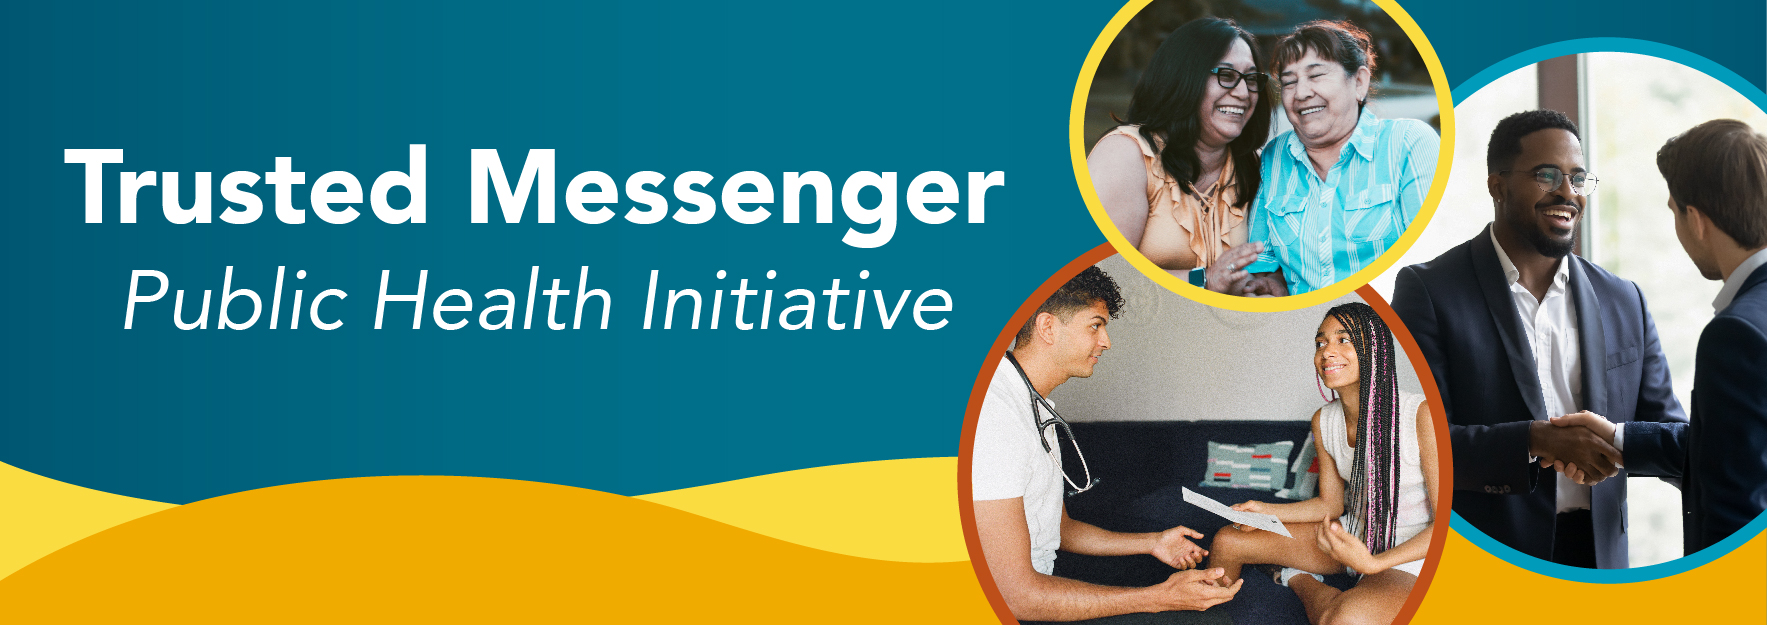  Public Health Initiative webpage banner with photos of people shaking hands and talking in a medical setting on a blue and yellow background